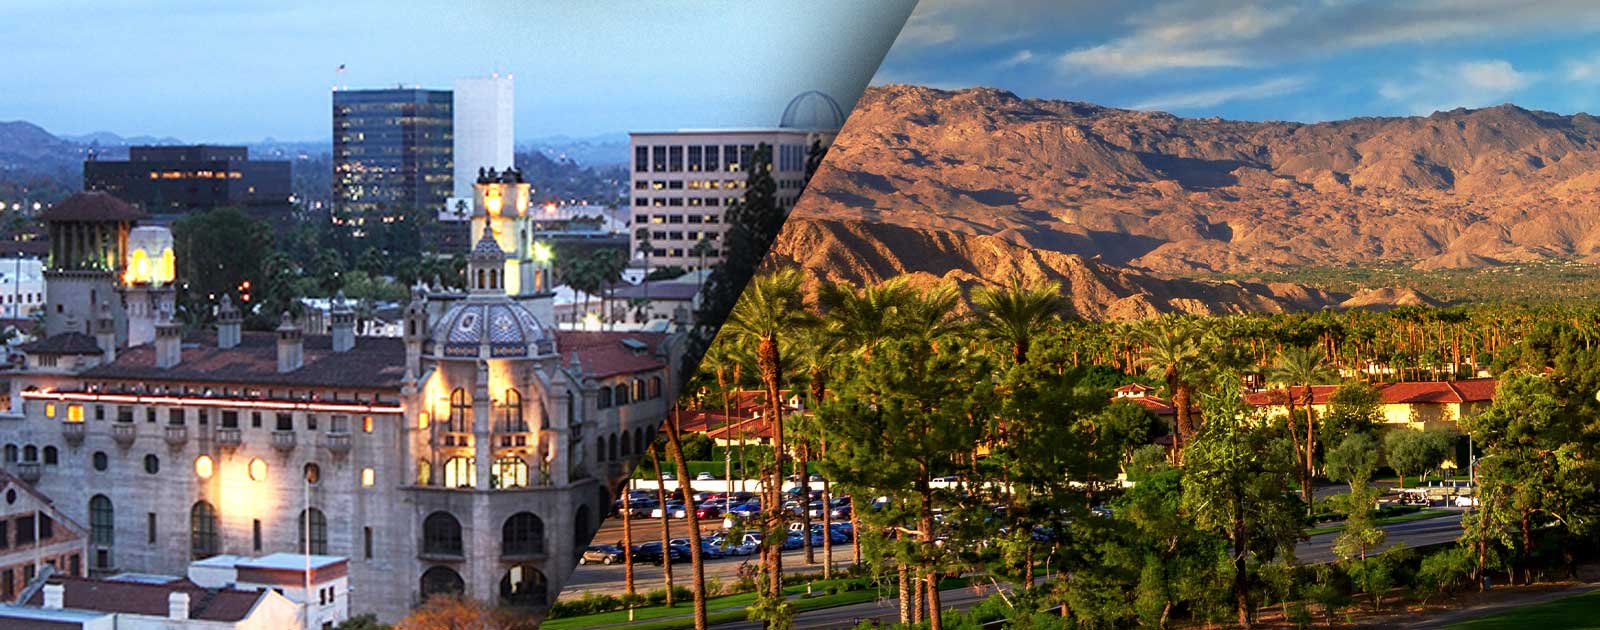 a split image showing the city of riverside contrasted with the coachella valley